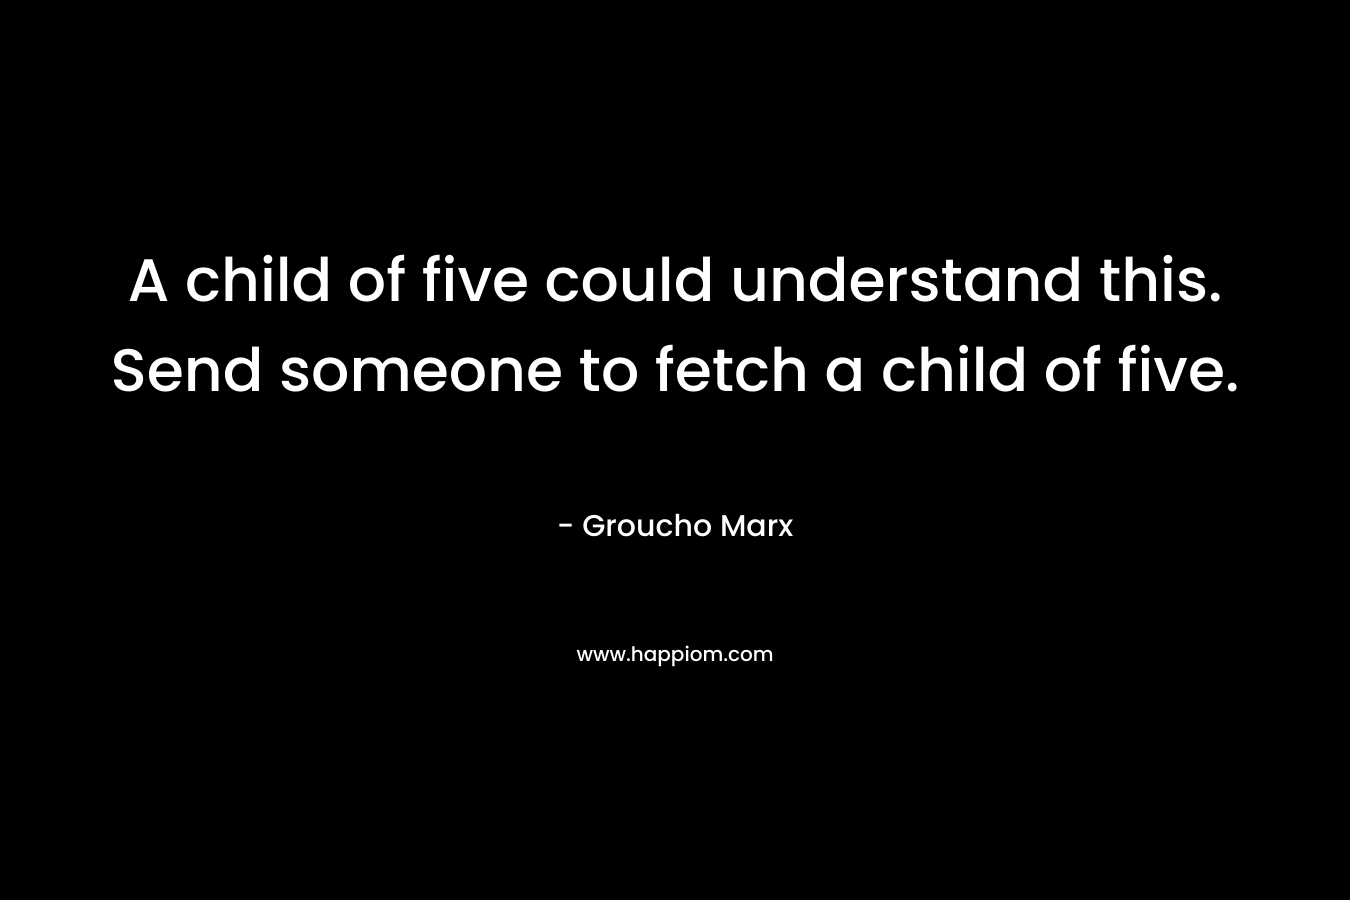 A child of five could understand this. Send someone to fetch a child of five.